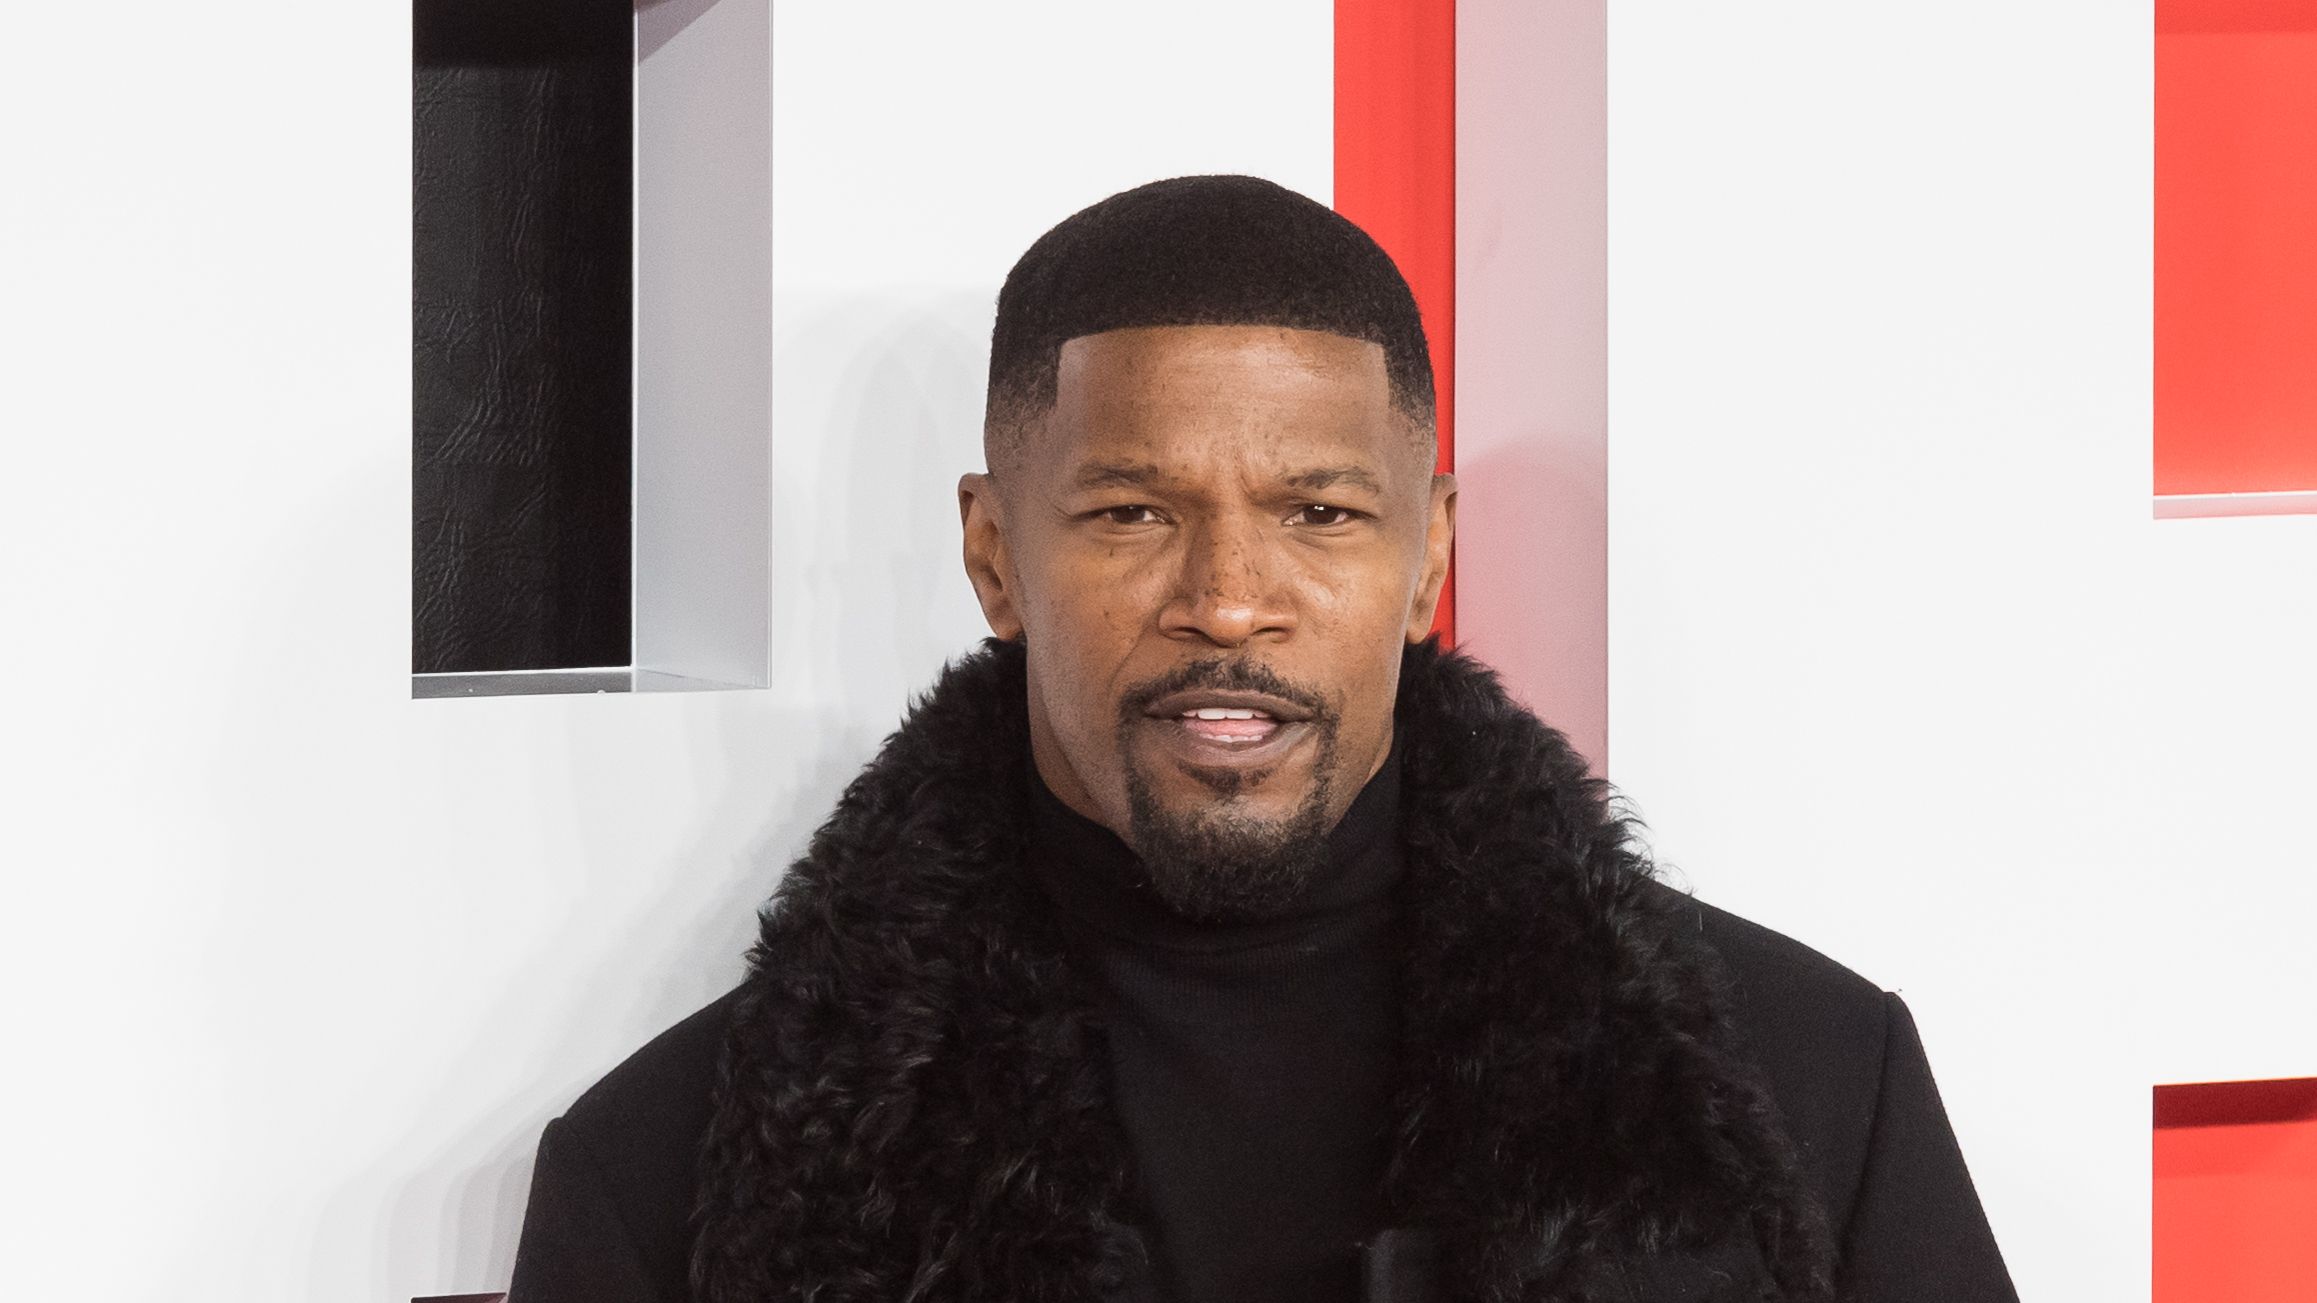 Jamie Foxx Seen on Boat Cruise After Months of Hospitalization